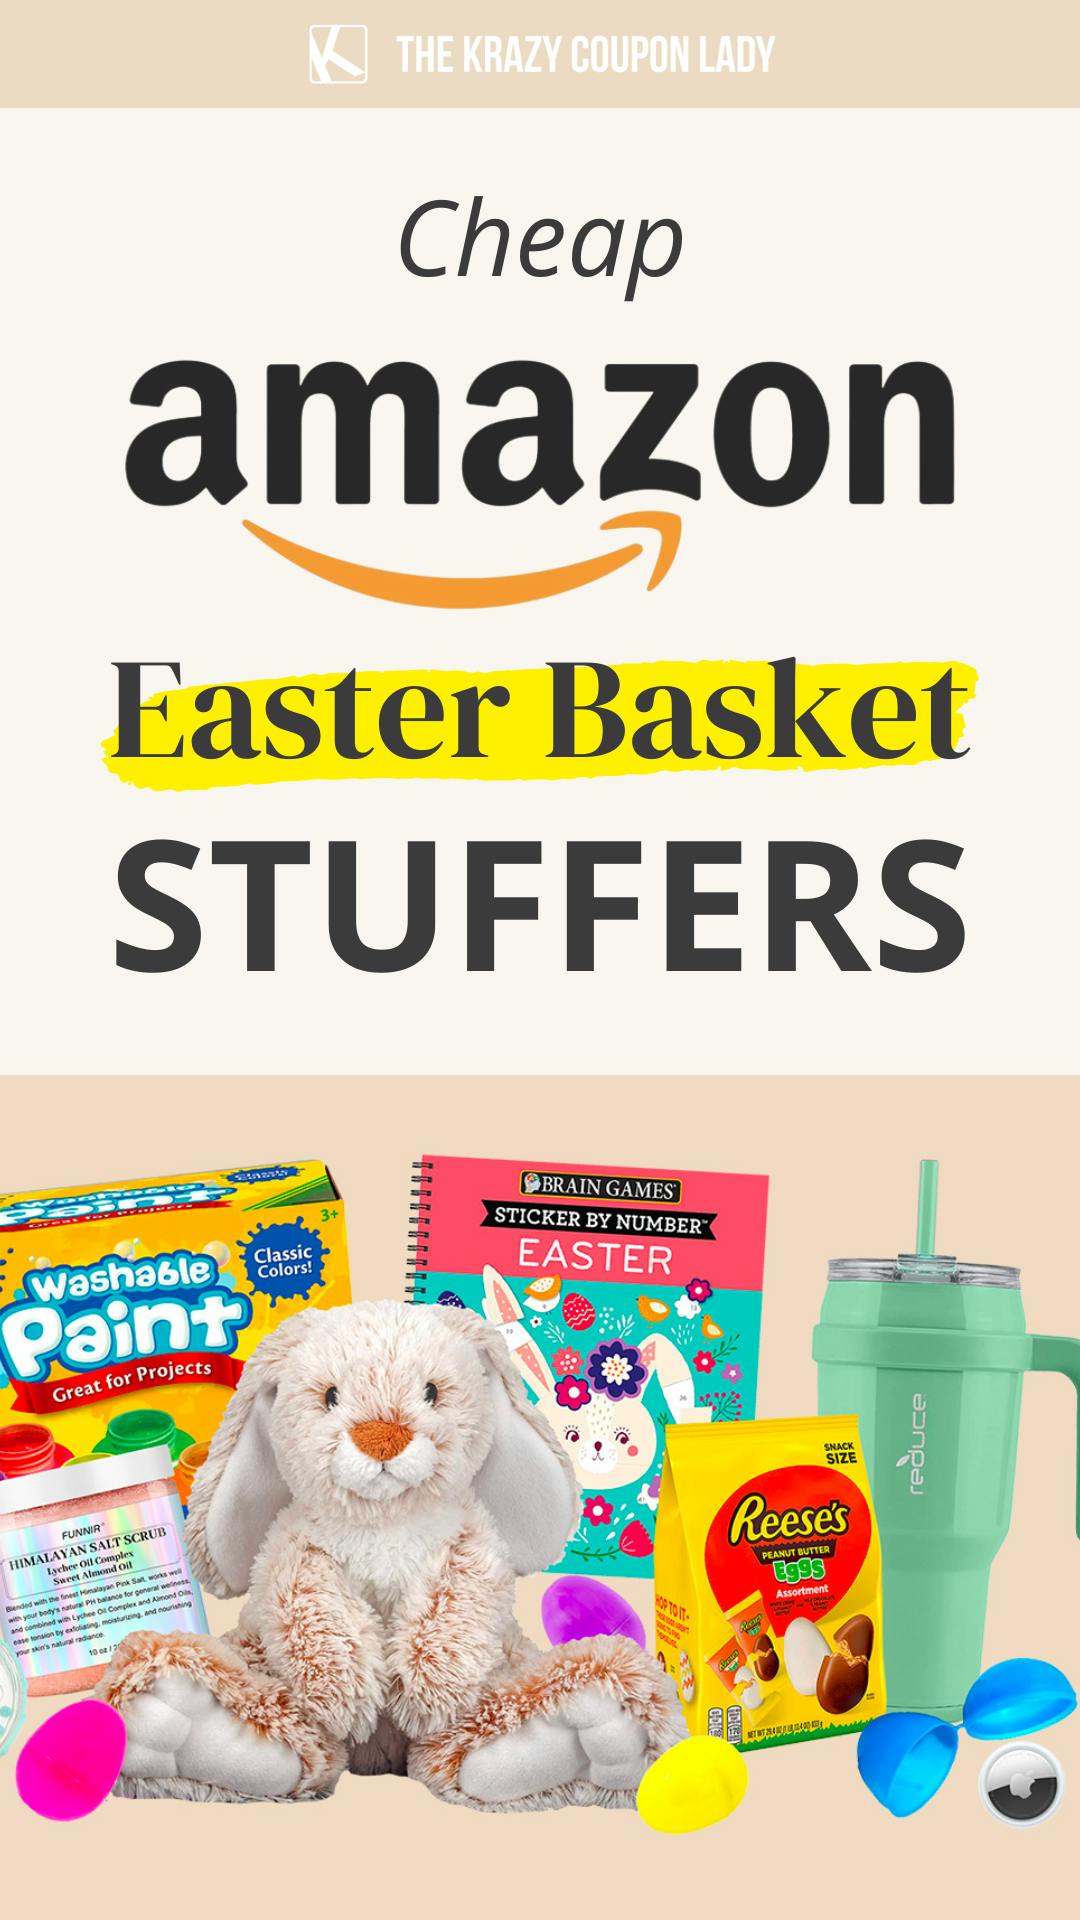 Cheap Amazon Easter Basket Stuffers for Babies, Kids, and Teens!